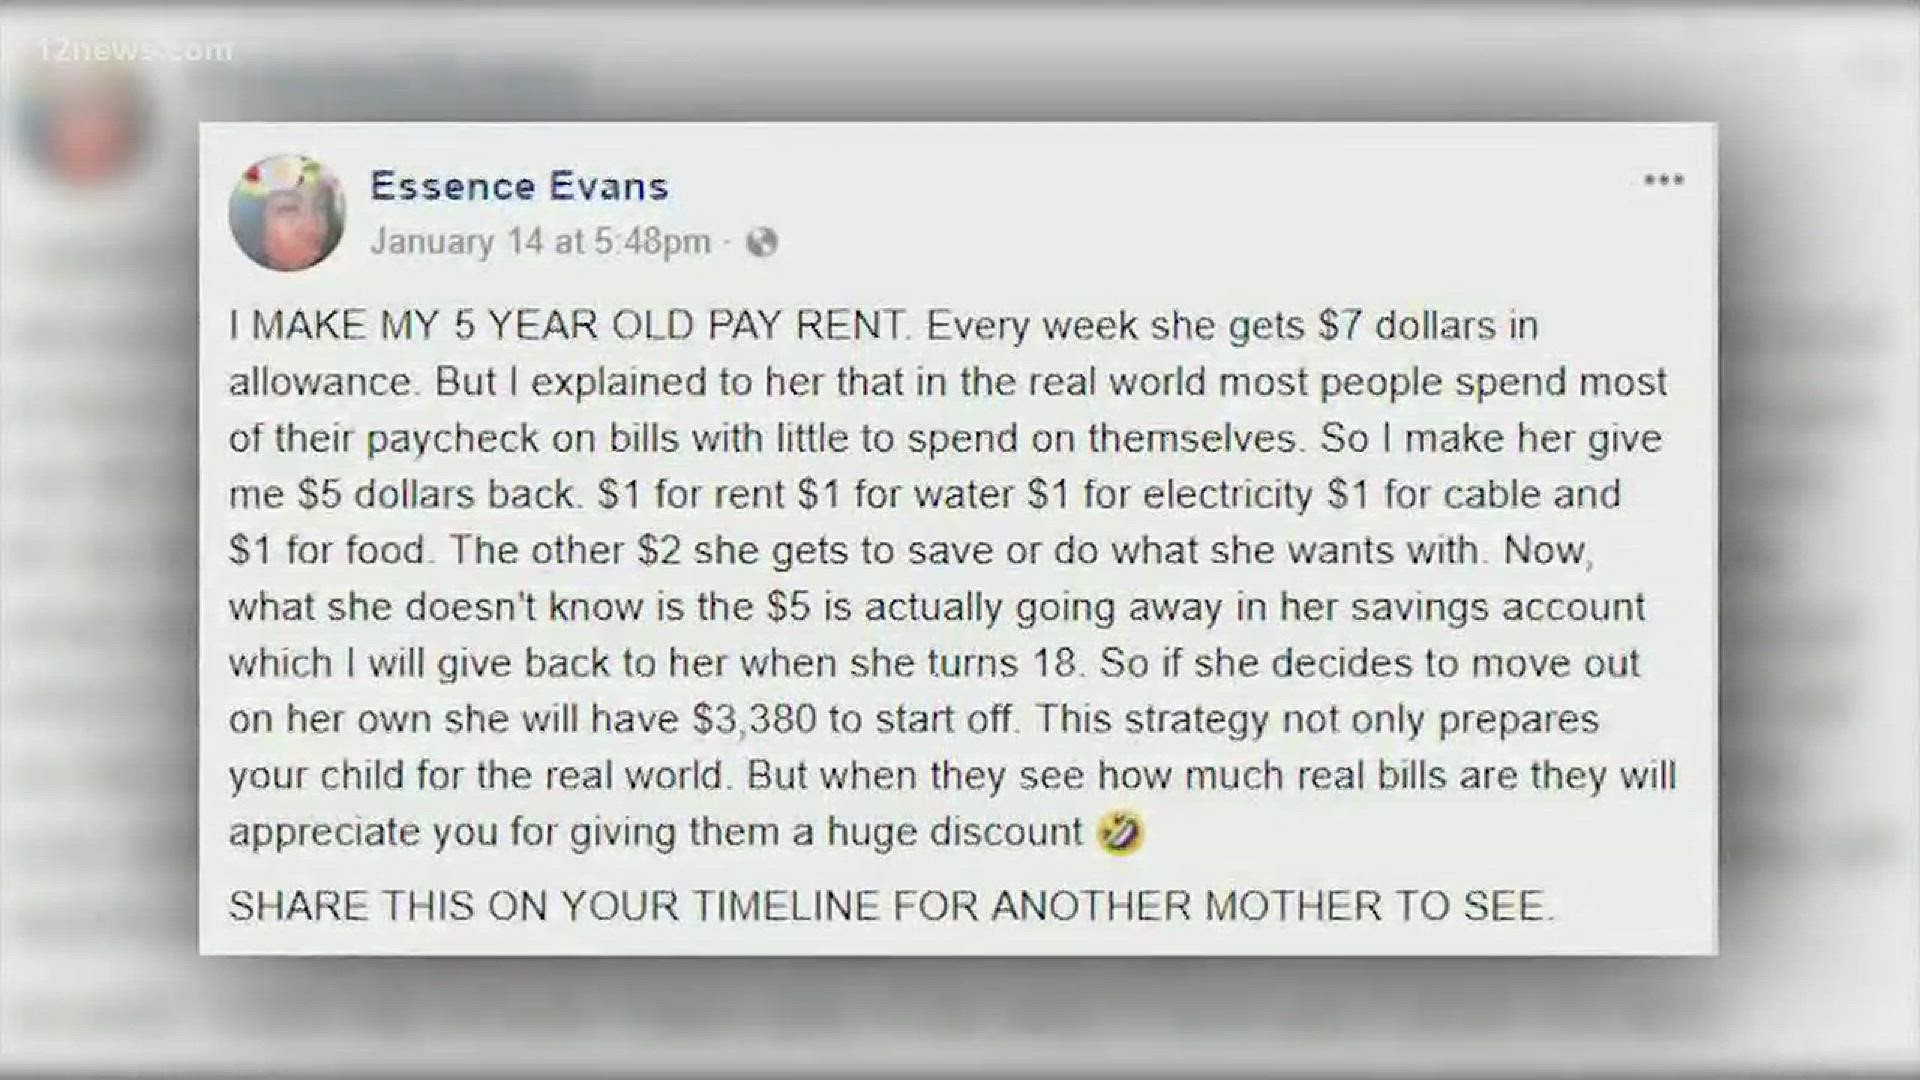 A mom received a mixed response from social media for her unique way of parenting her 5-year-old for real-world spending.